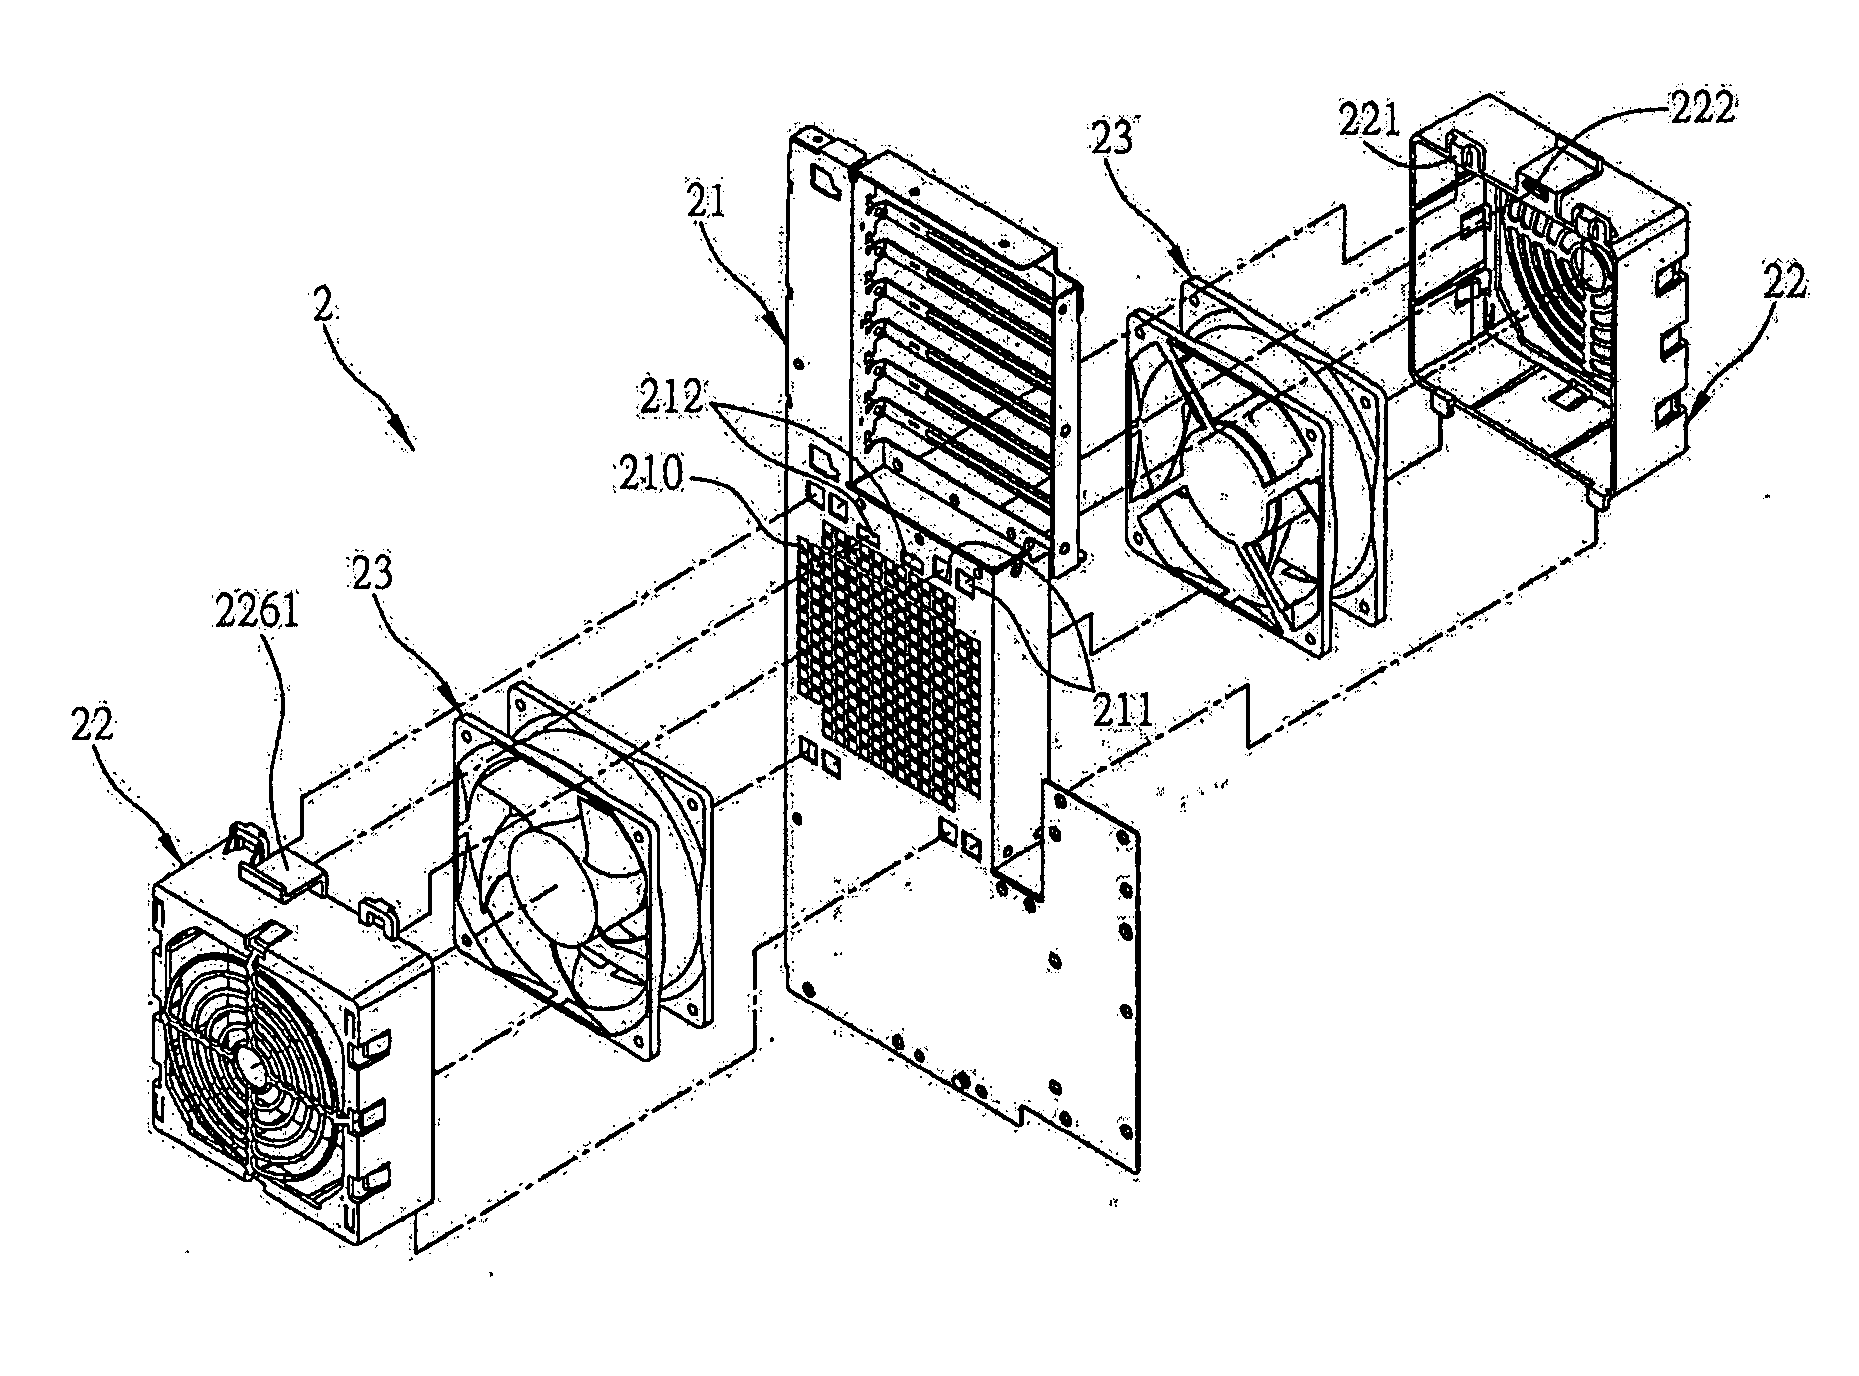 Assembly structure for securing heat-dissipating fan